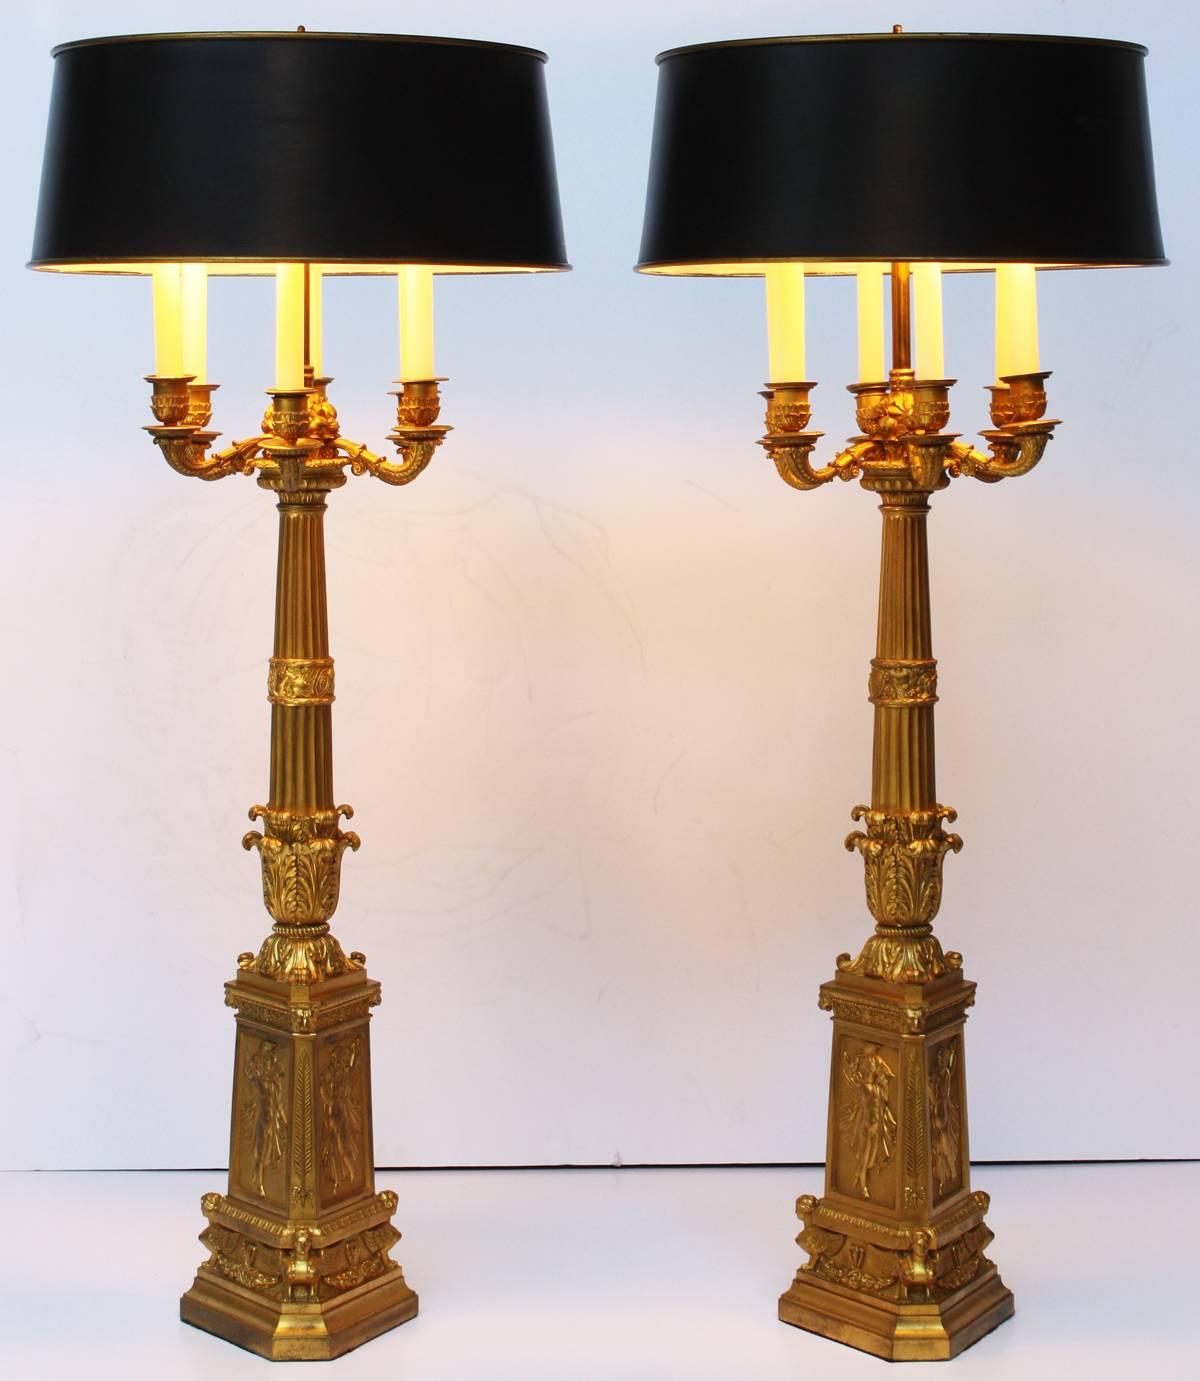 A pair of period French empire gilt bronze six-arm candelabra as lamps, tall with fluted cylinders having overlapping acanthus leaves with classical decoration, over a six-sided triangular base with winged caryatids on canted corners with round hole